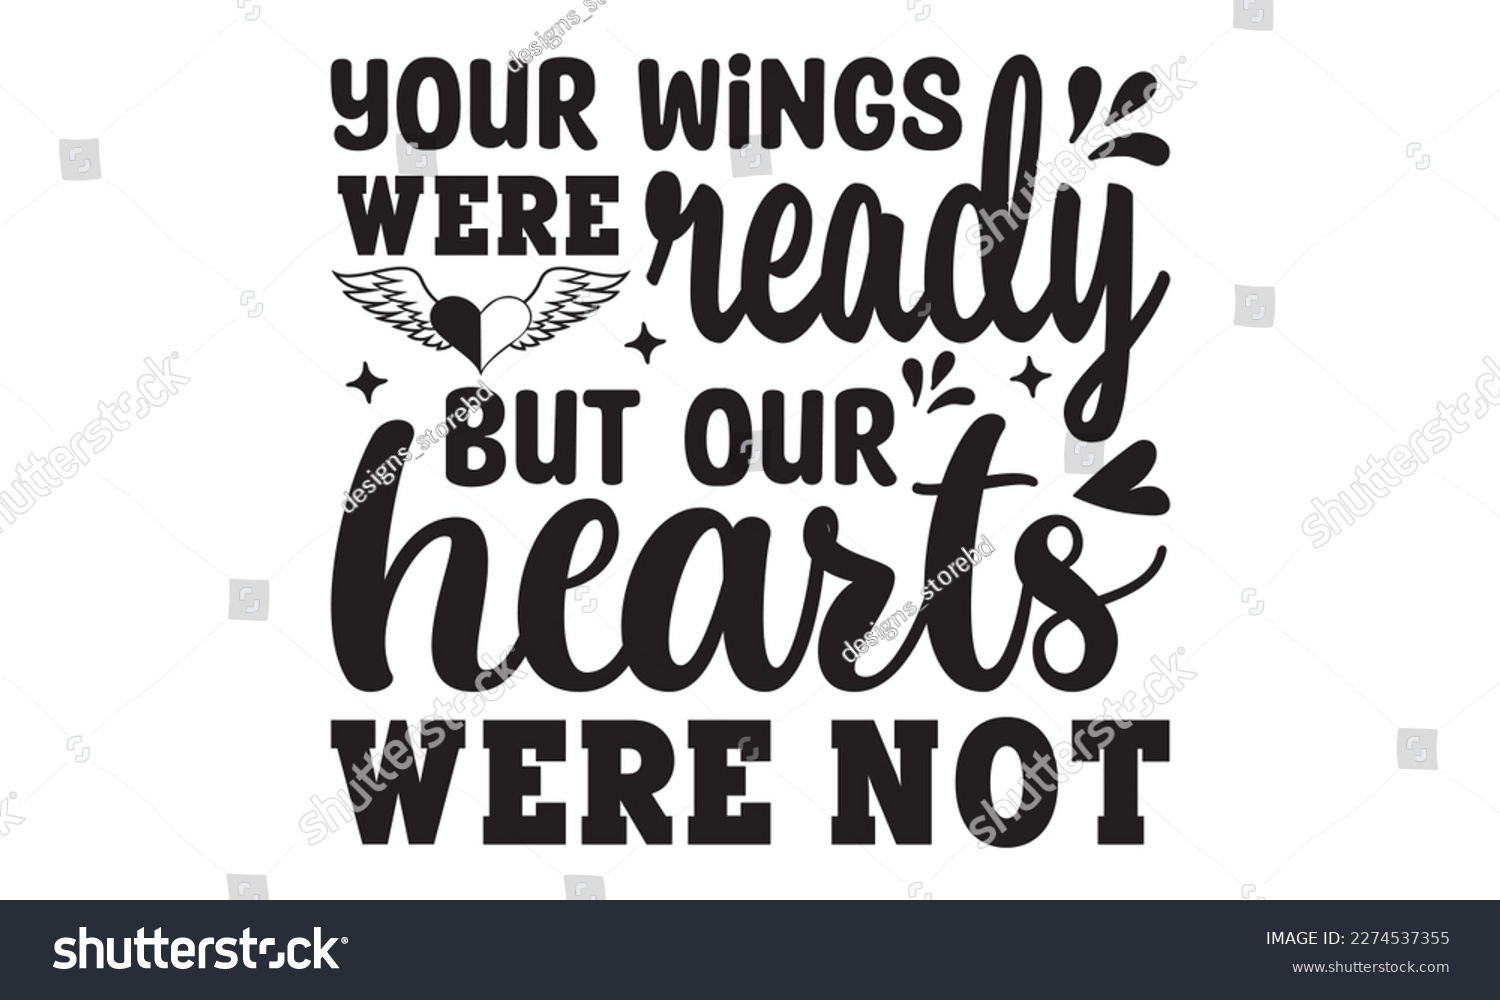 SVG of Your wings were ready but our hearts were not svg, Veteran t-shirt design, Memorial day svg, Hmemorial day svg design and Craft Designs background, Calligraphy graphic design typography and Hand writt svg